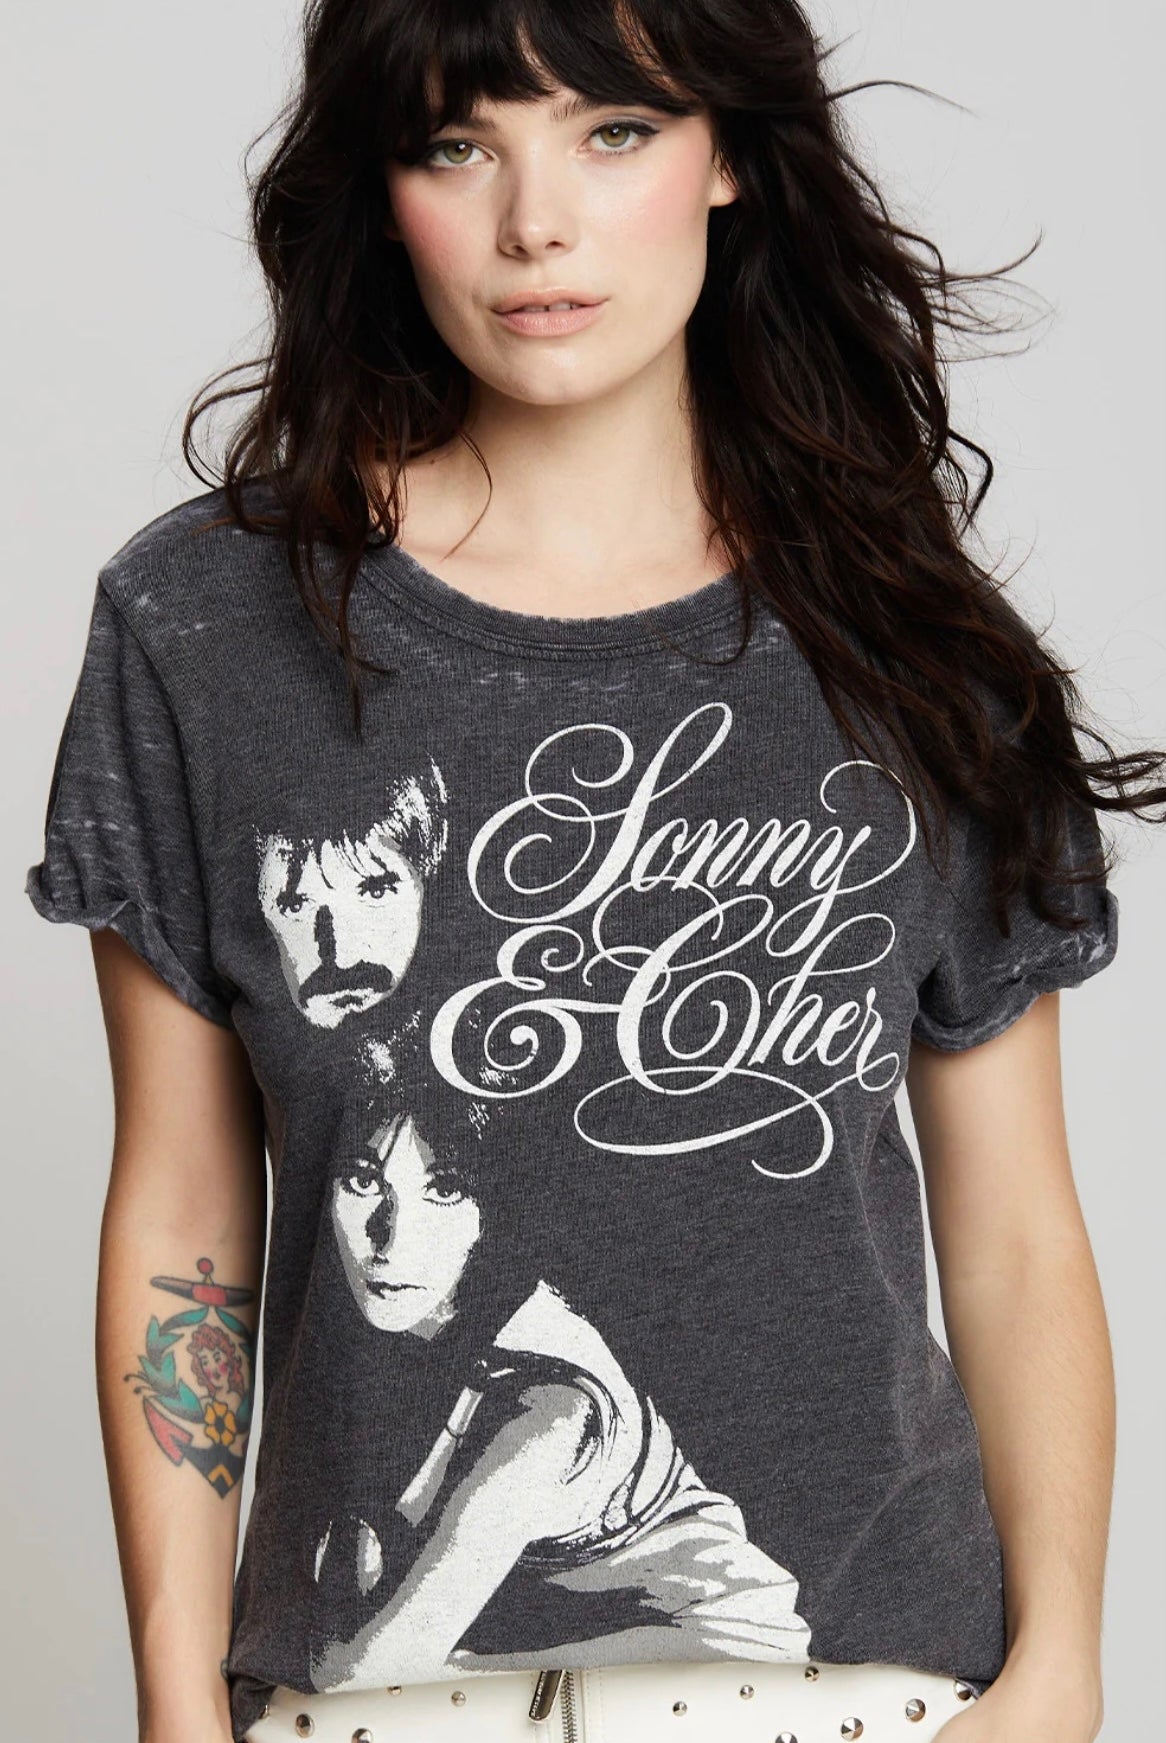 Sonny and Cher Tee Shirt by Recycled Karma at Dilaru Boutique Nutley NJ 